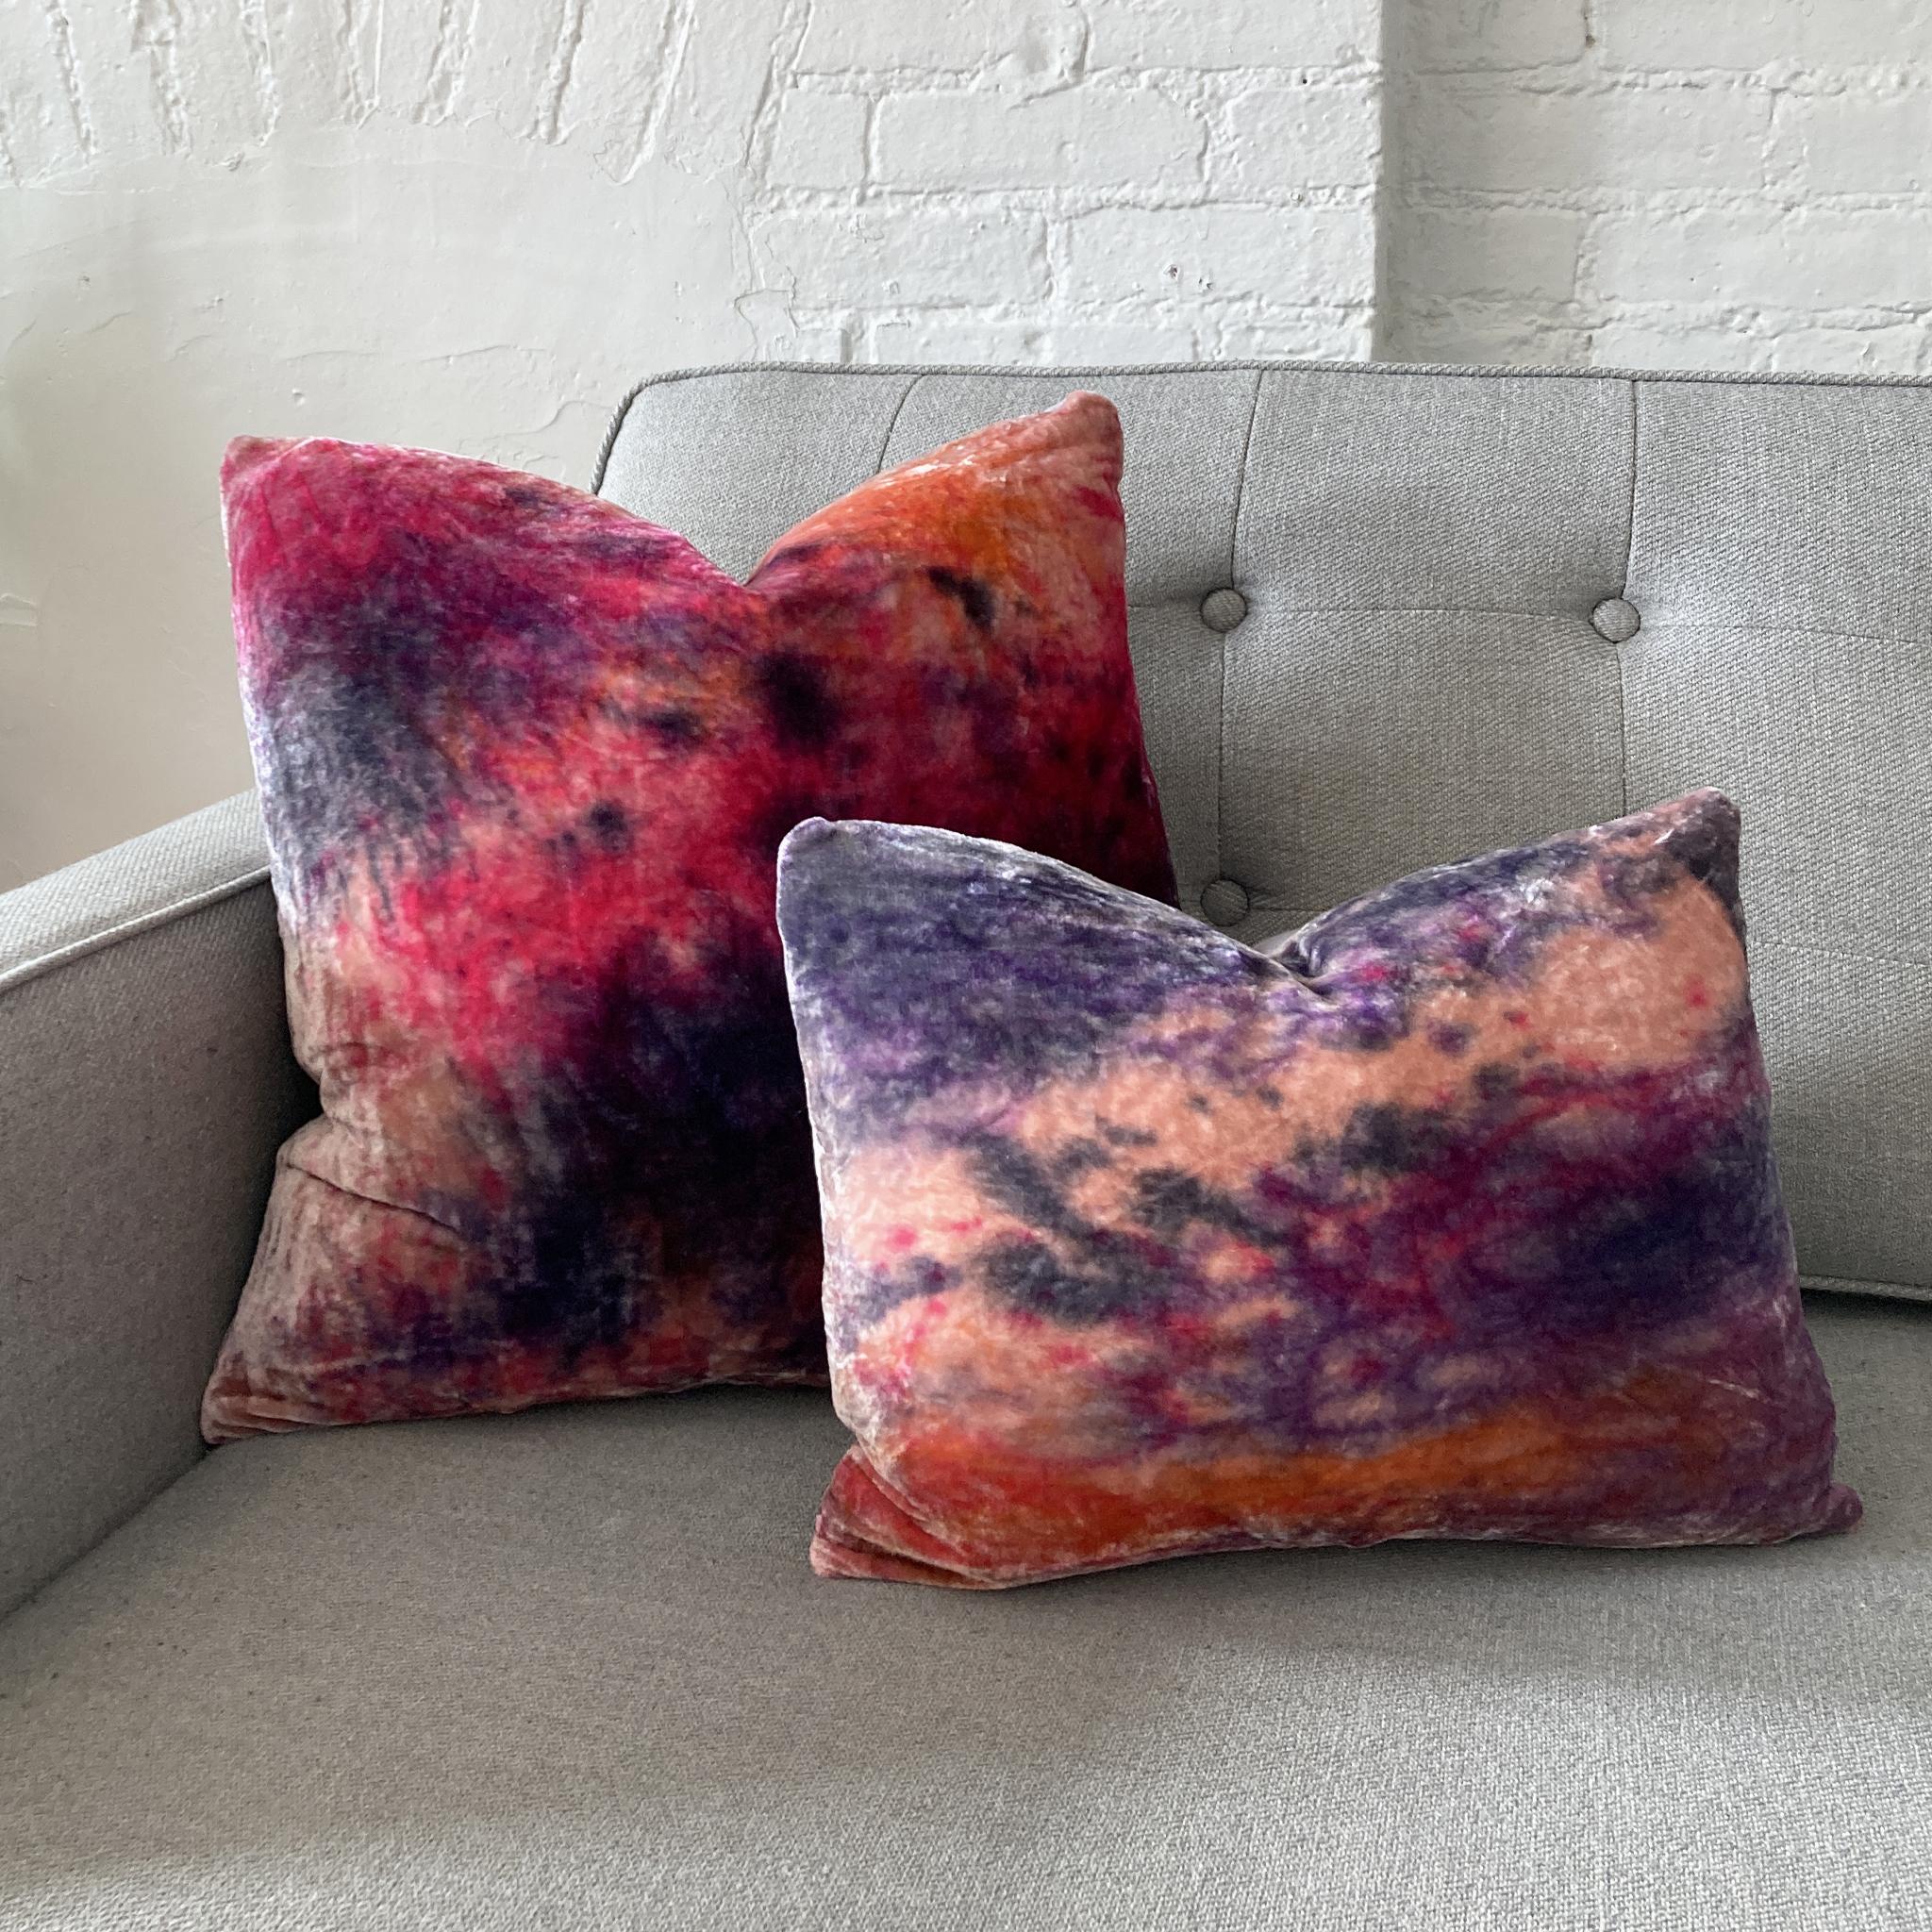 Rose velvet pillow dyed with magenta, orange and navy in an abstract pattern with gray linen backing. Hand-painted and sewn in New York City, down pillow insert made locally in NYC. Pillow measures 18 x 18 inches. Each velvet pillow is handmade and